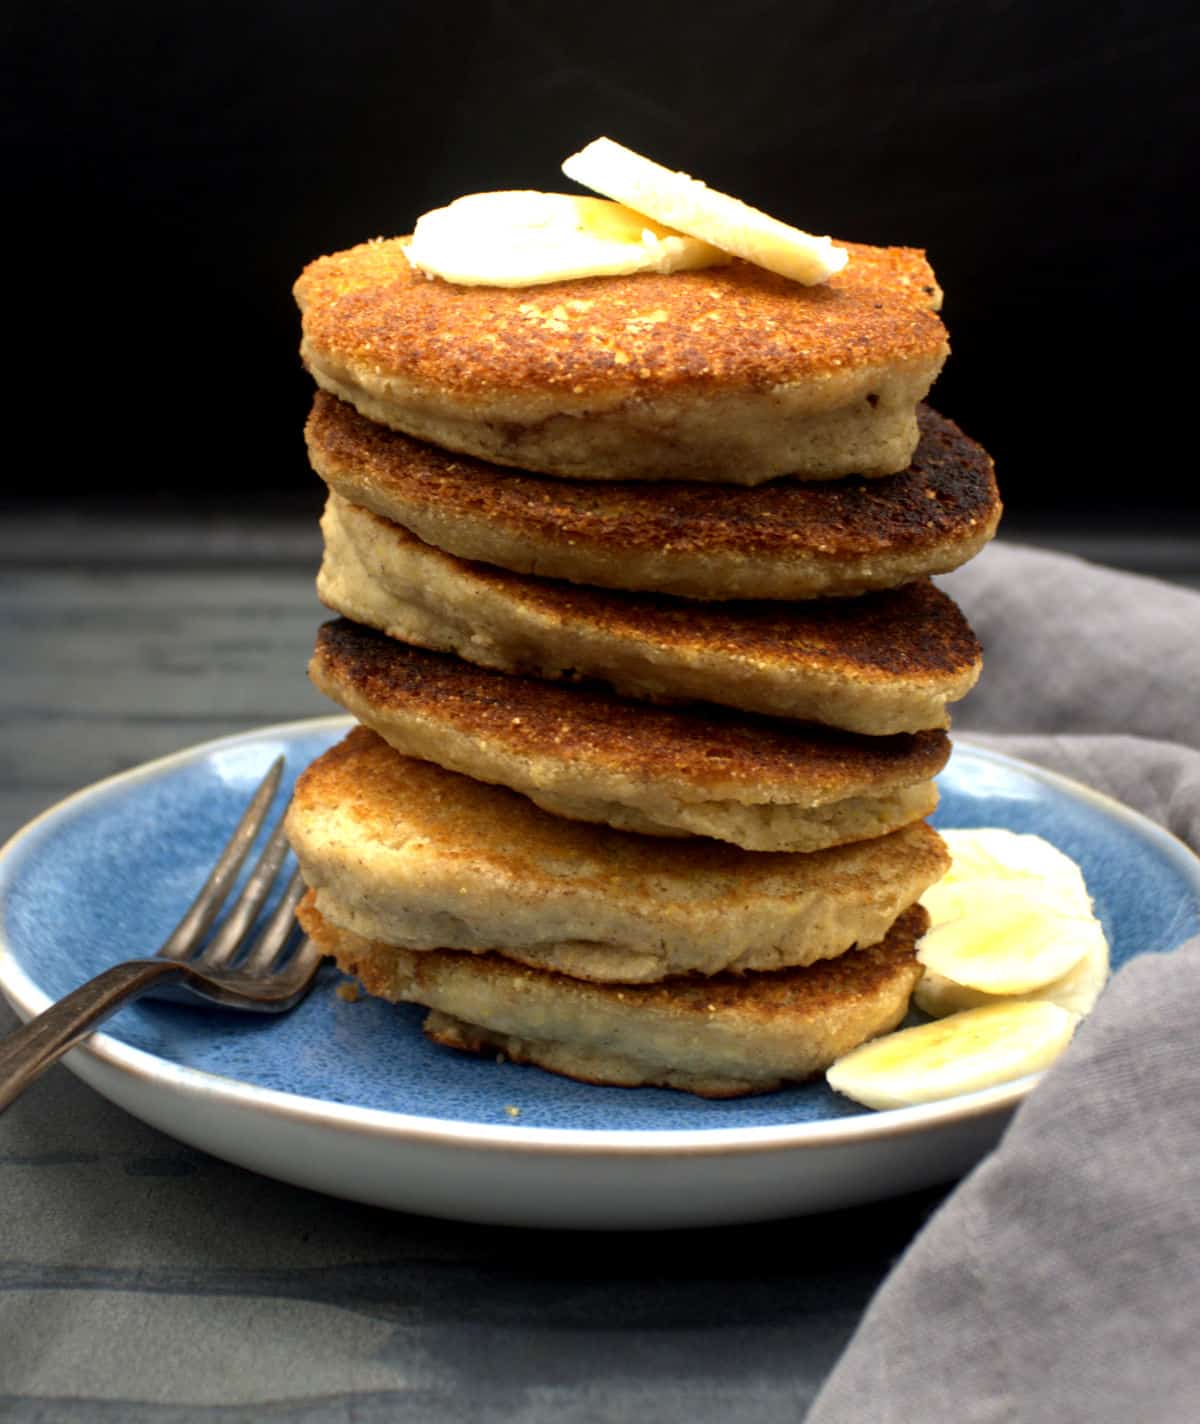 Vegan gluten-free multigrain pancakes stacked on a plate with banana slices.